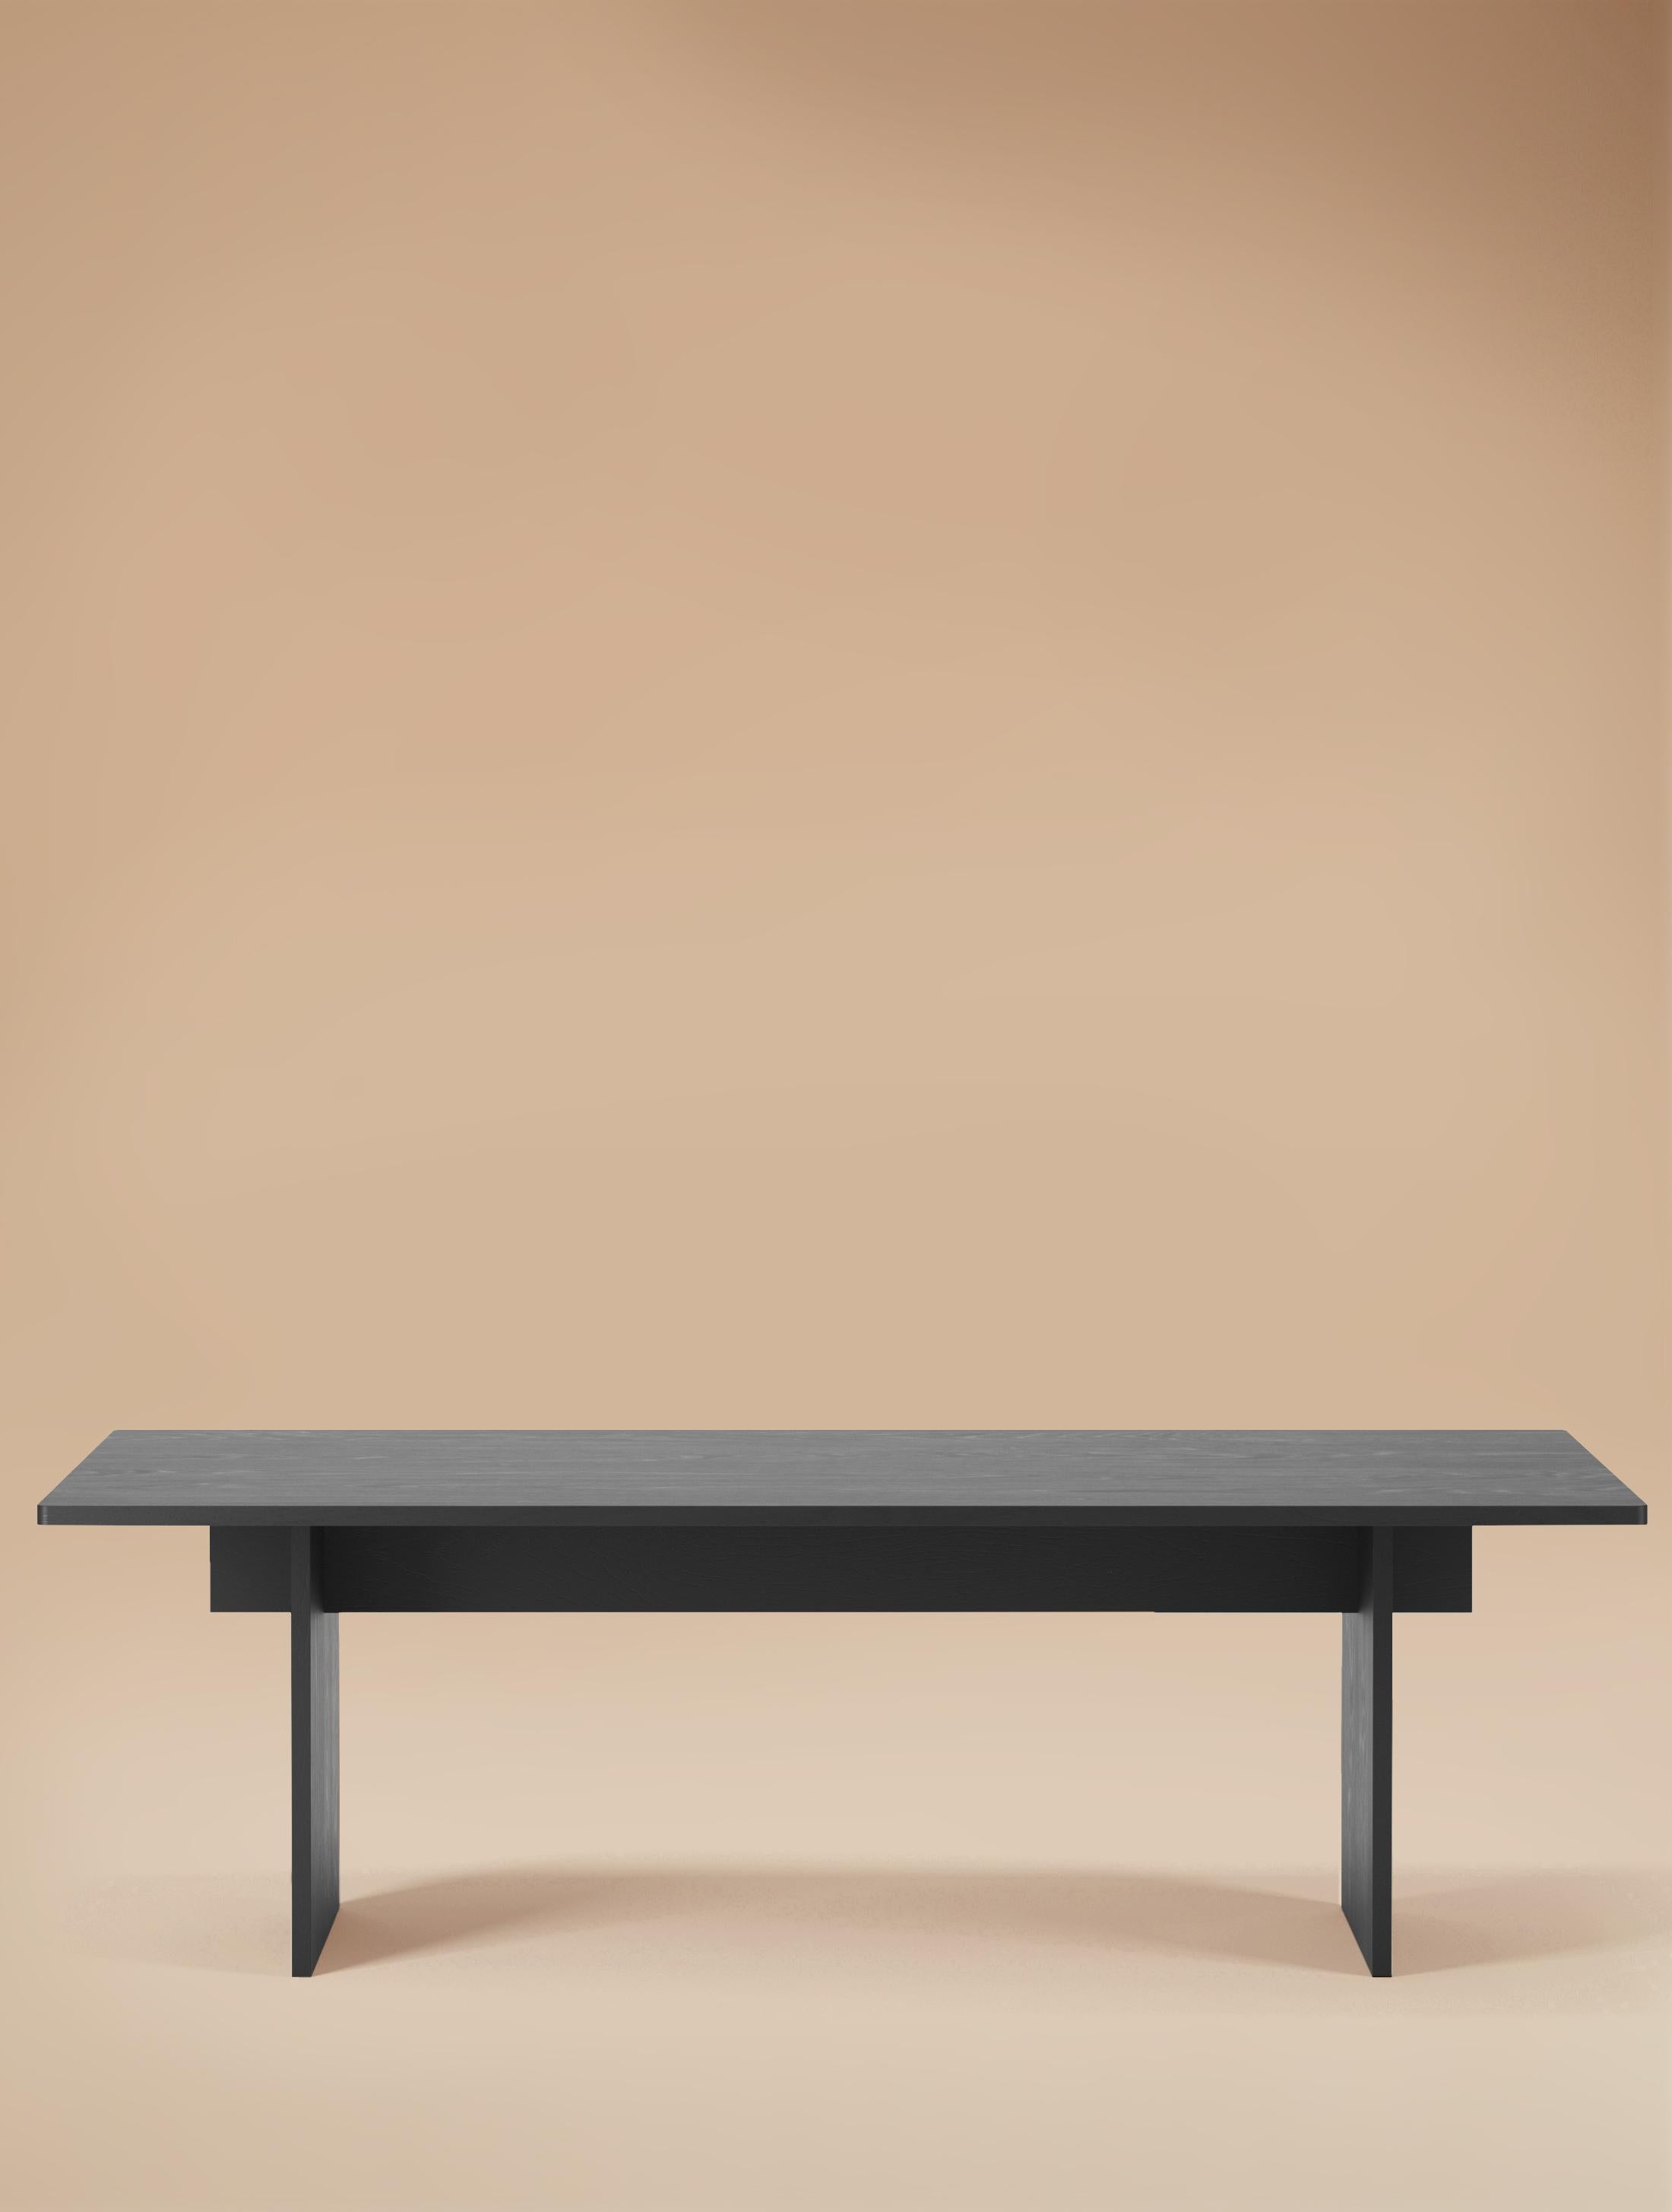 8 Seater  Faure Table Handcrafted in Walnut by Kevin Frankental for Lemon  8